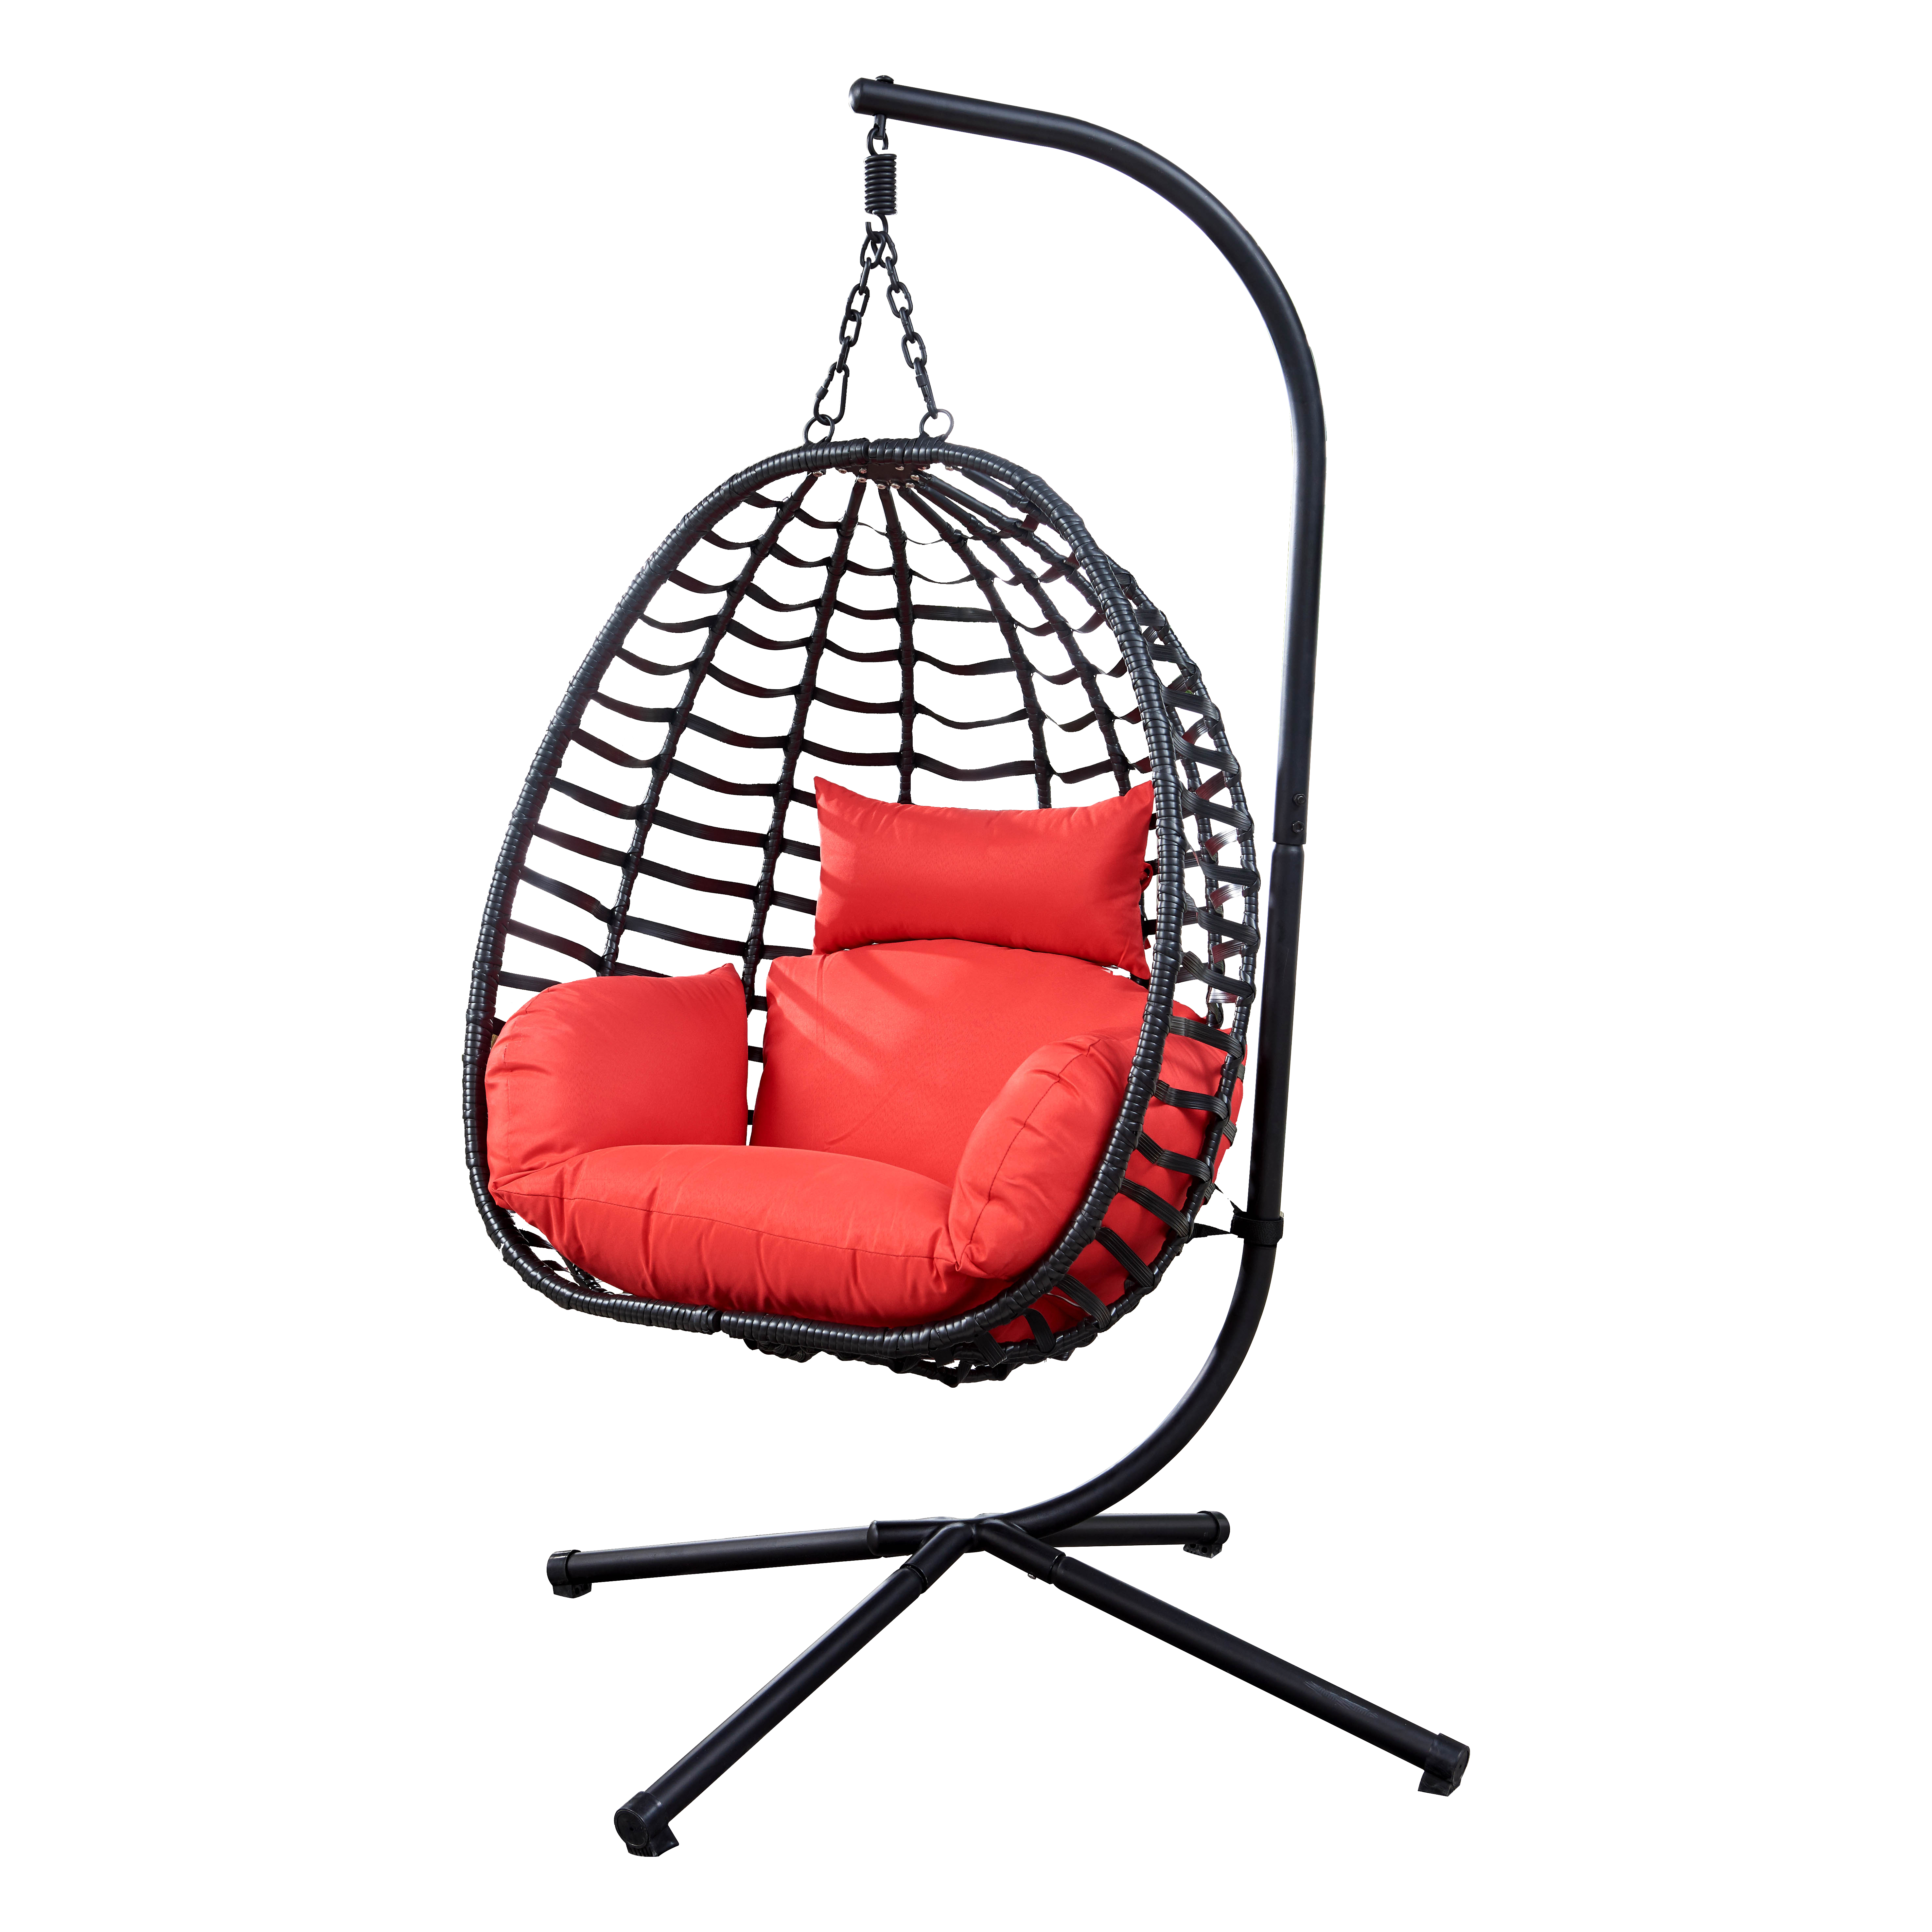 SESSLIFE Patio Egg Chair, Wicker Egg Chair Outdoor Chair, Folding Hanging Egg Chair with Stand and UV Resistant Cushion, Red Basket Chair Egg Swing Chair, TE3134 - image 2 of 6